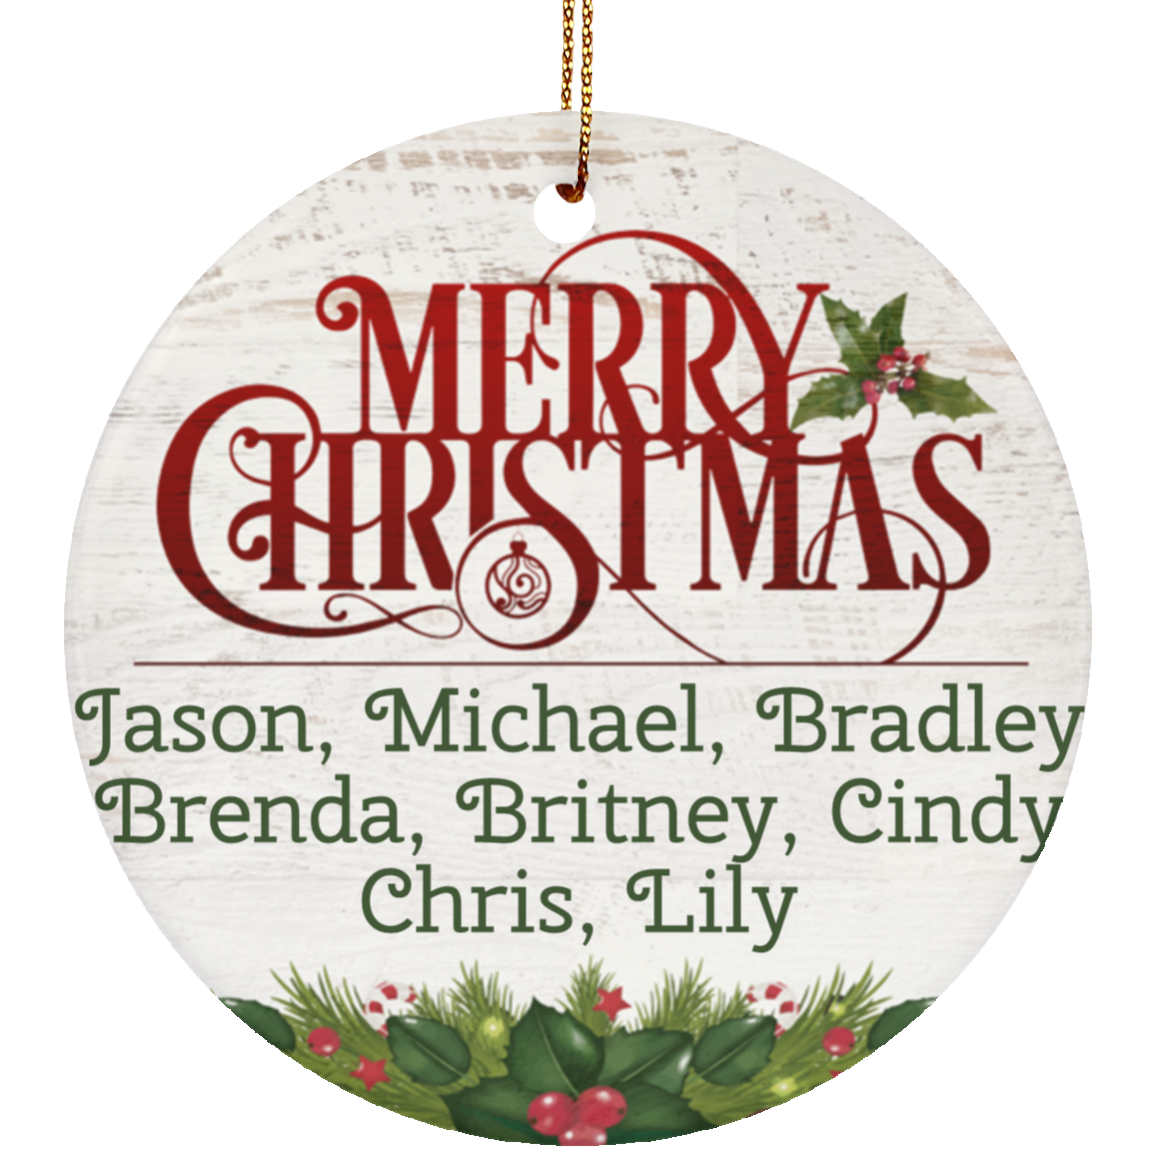 Personalized Ceramic Christmas Circle Ornament - Merry Christmas With Custom Names 5 6 7 person family